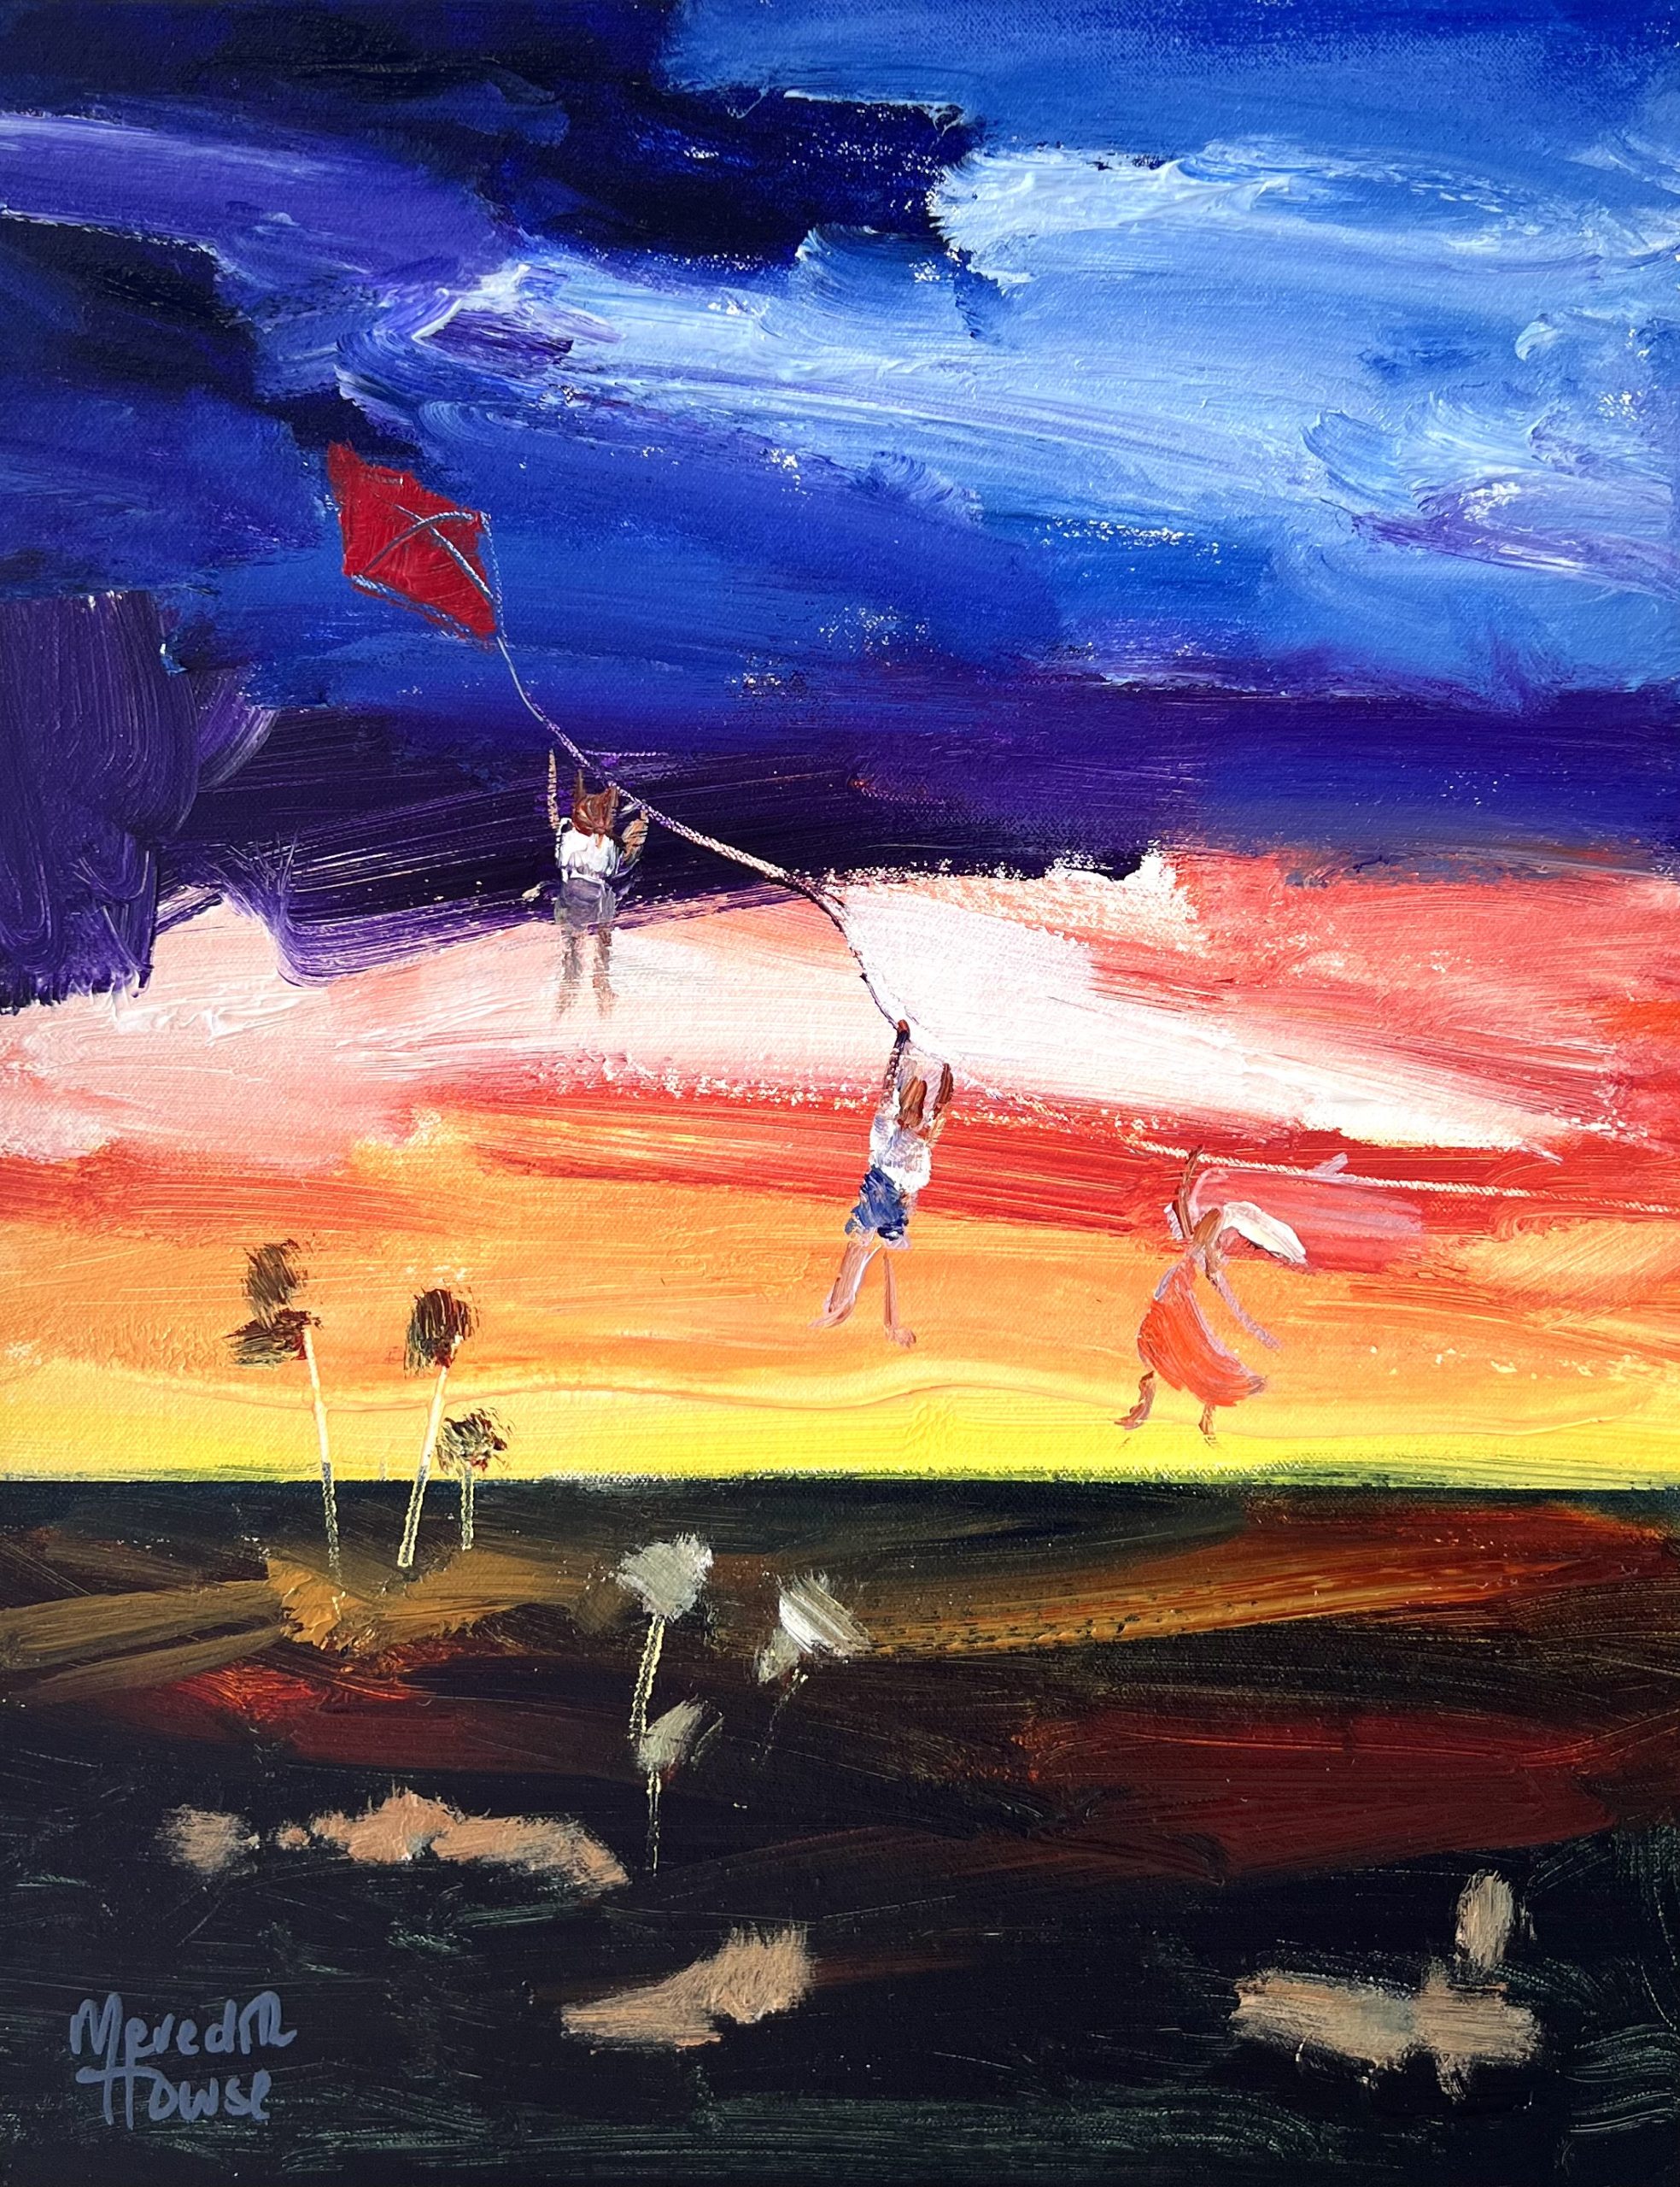 Kite Flying Kids Over The Outback By Meredith Howse (1)